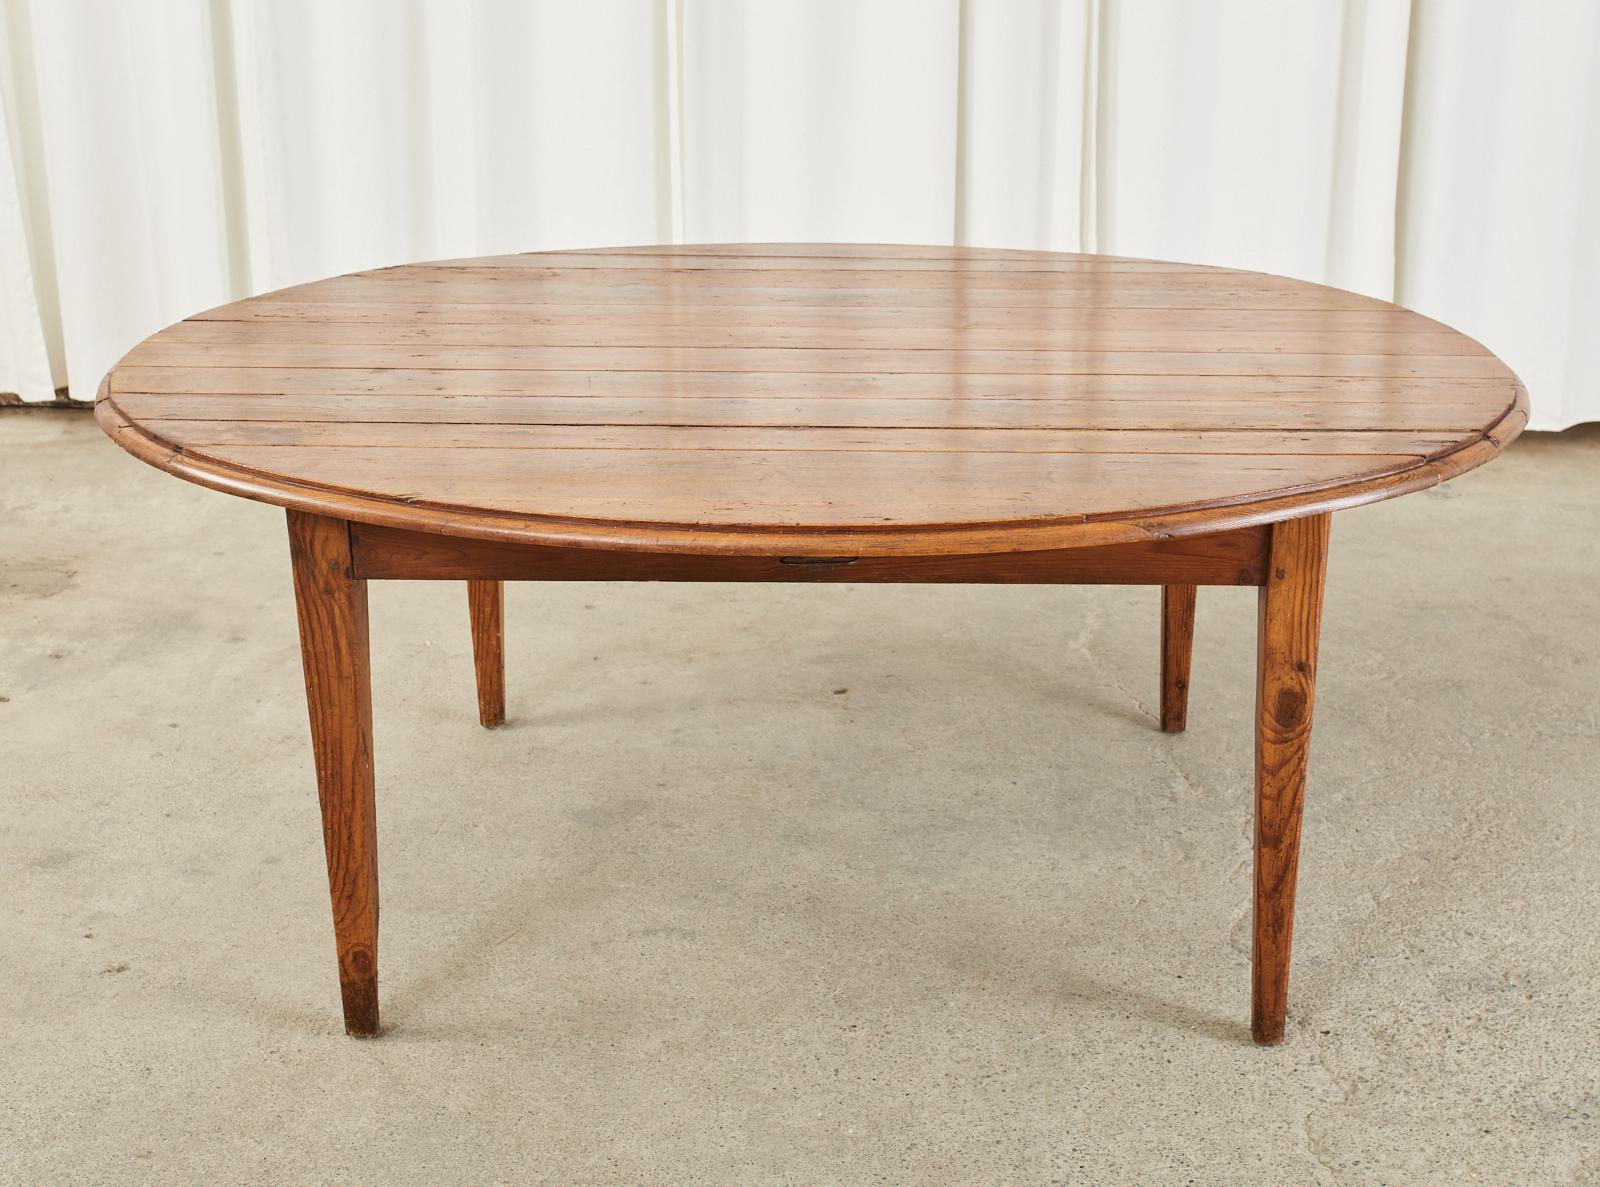 Country English Provincial Pine Farmhouse Oval Drop-Leaf Dining Table 1